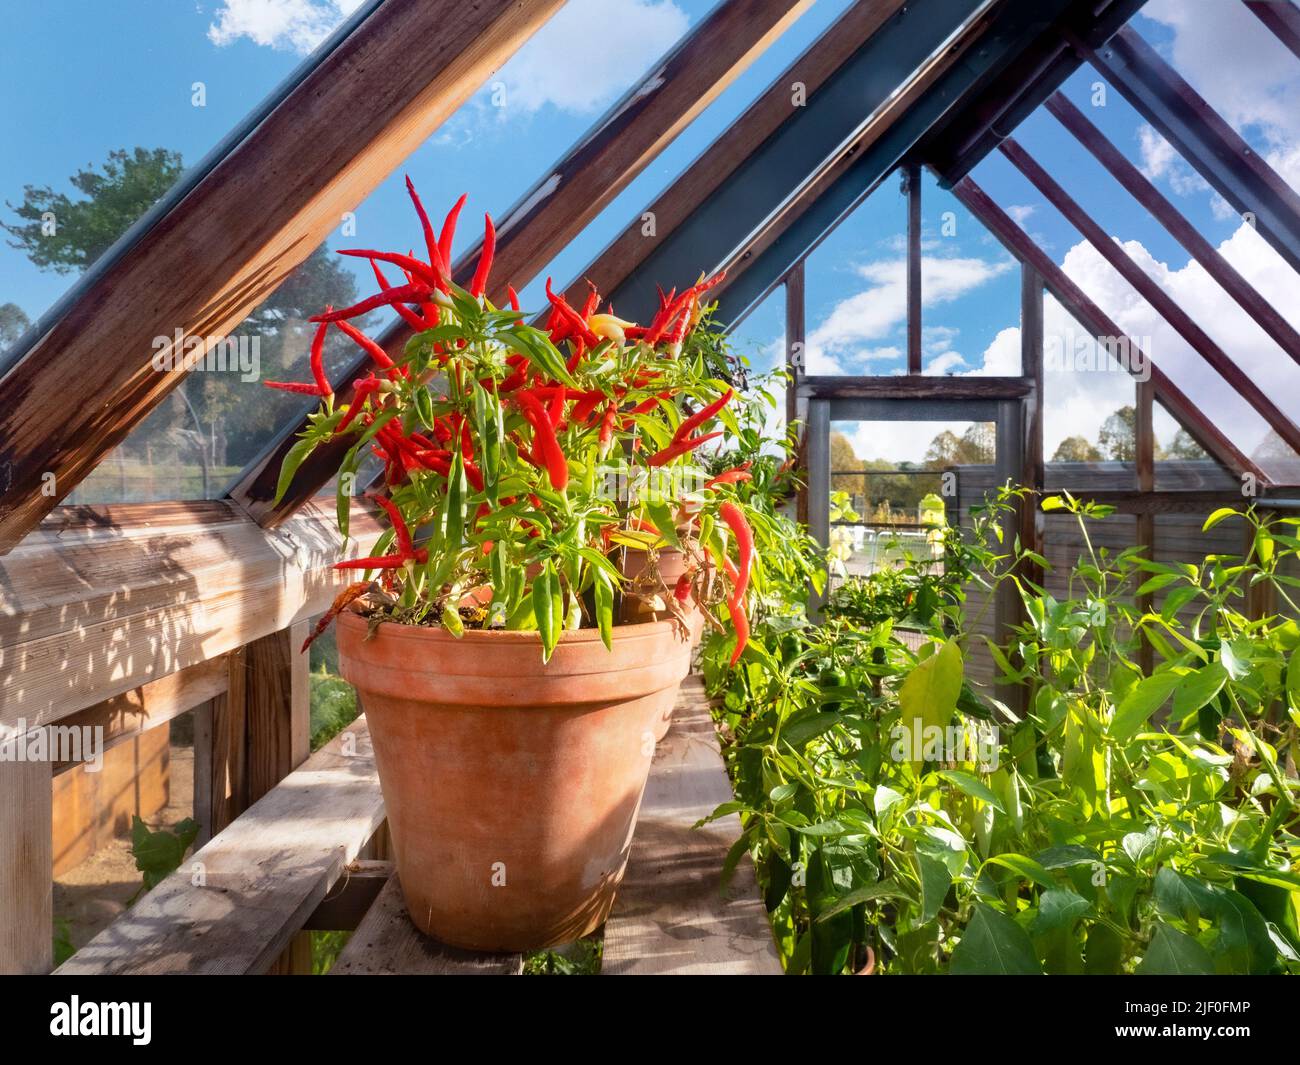 Chilli Dawn terracotta potted pot in a traditional wooden greenhouse, a hot variety of Chillies. Landscape view with sun & blue sky. Kitchen garden UK Stock Photo